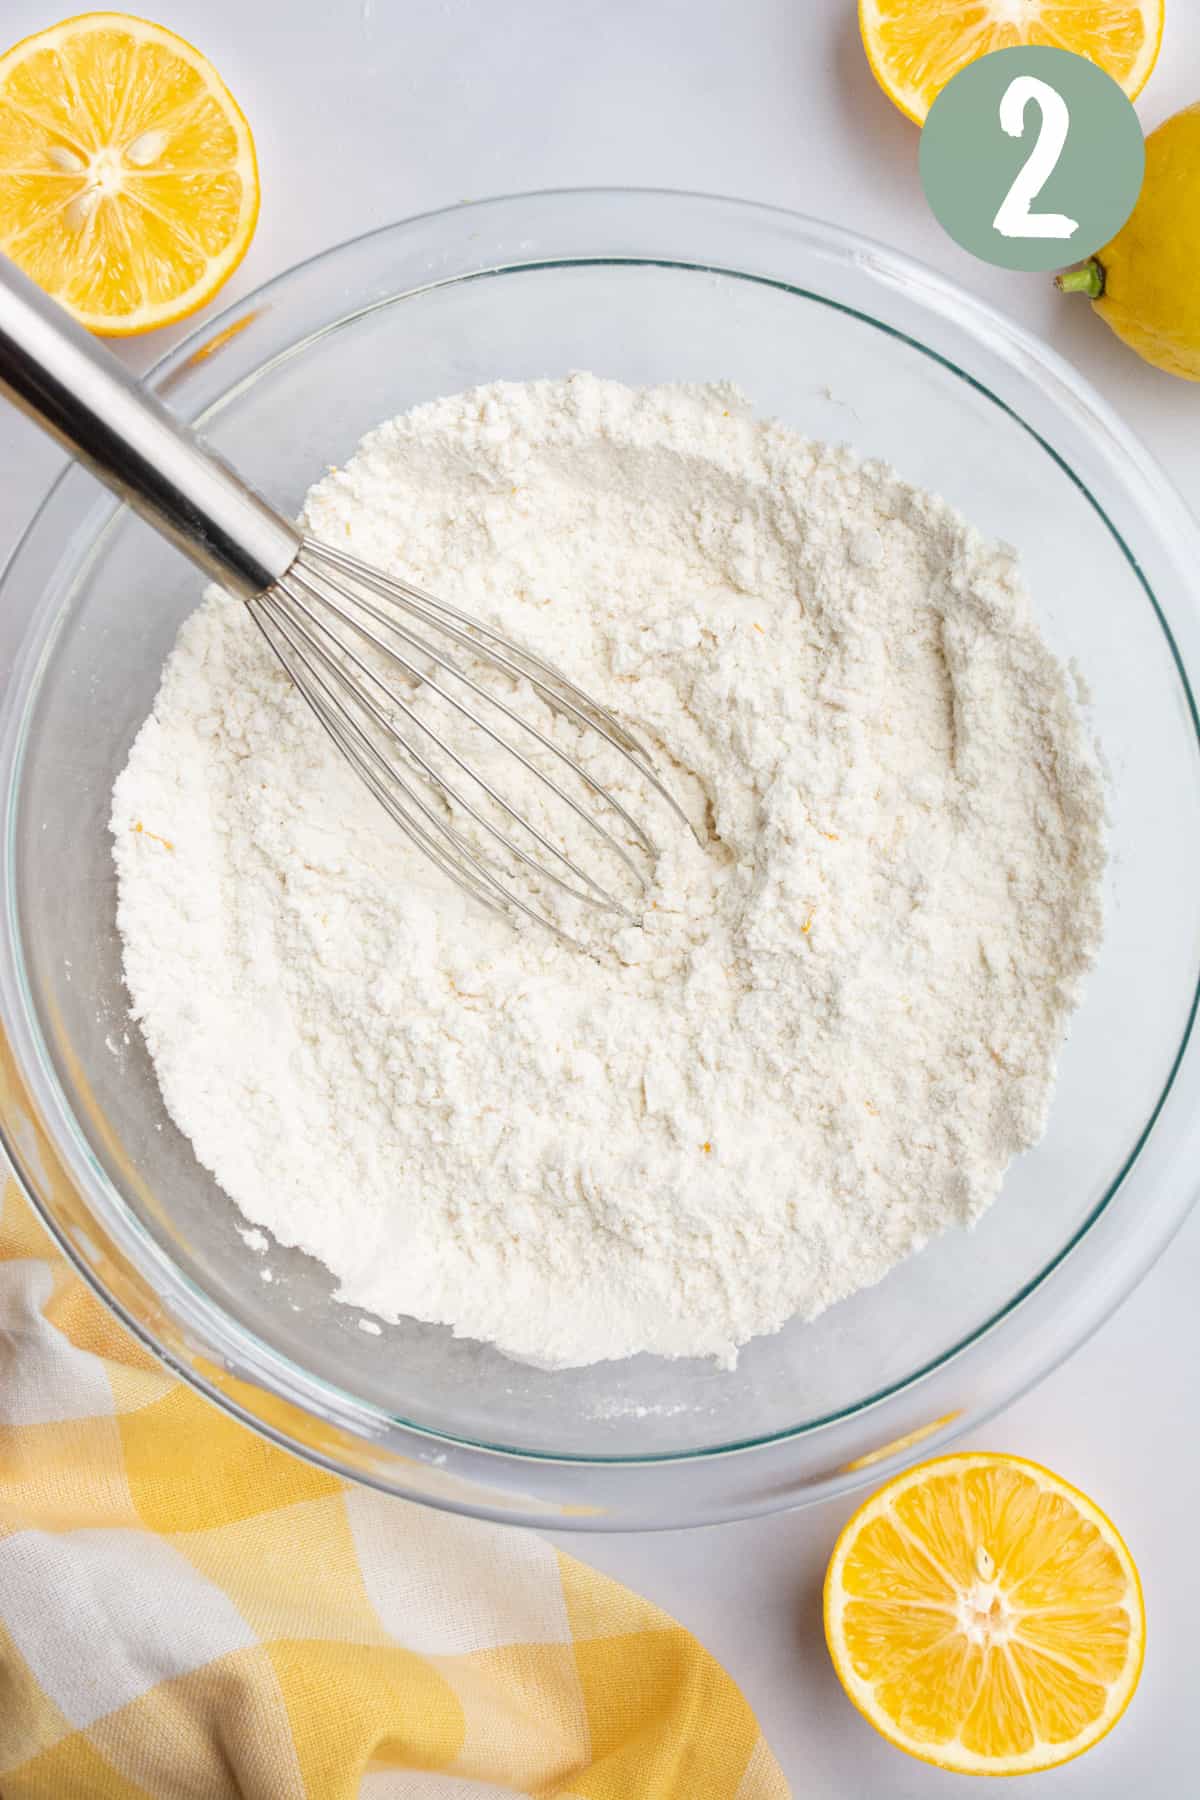 A whisk in a glass bowl of flour with cut lemon halves and a yellow checkered towel around the bowl.